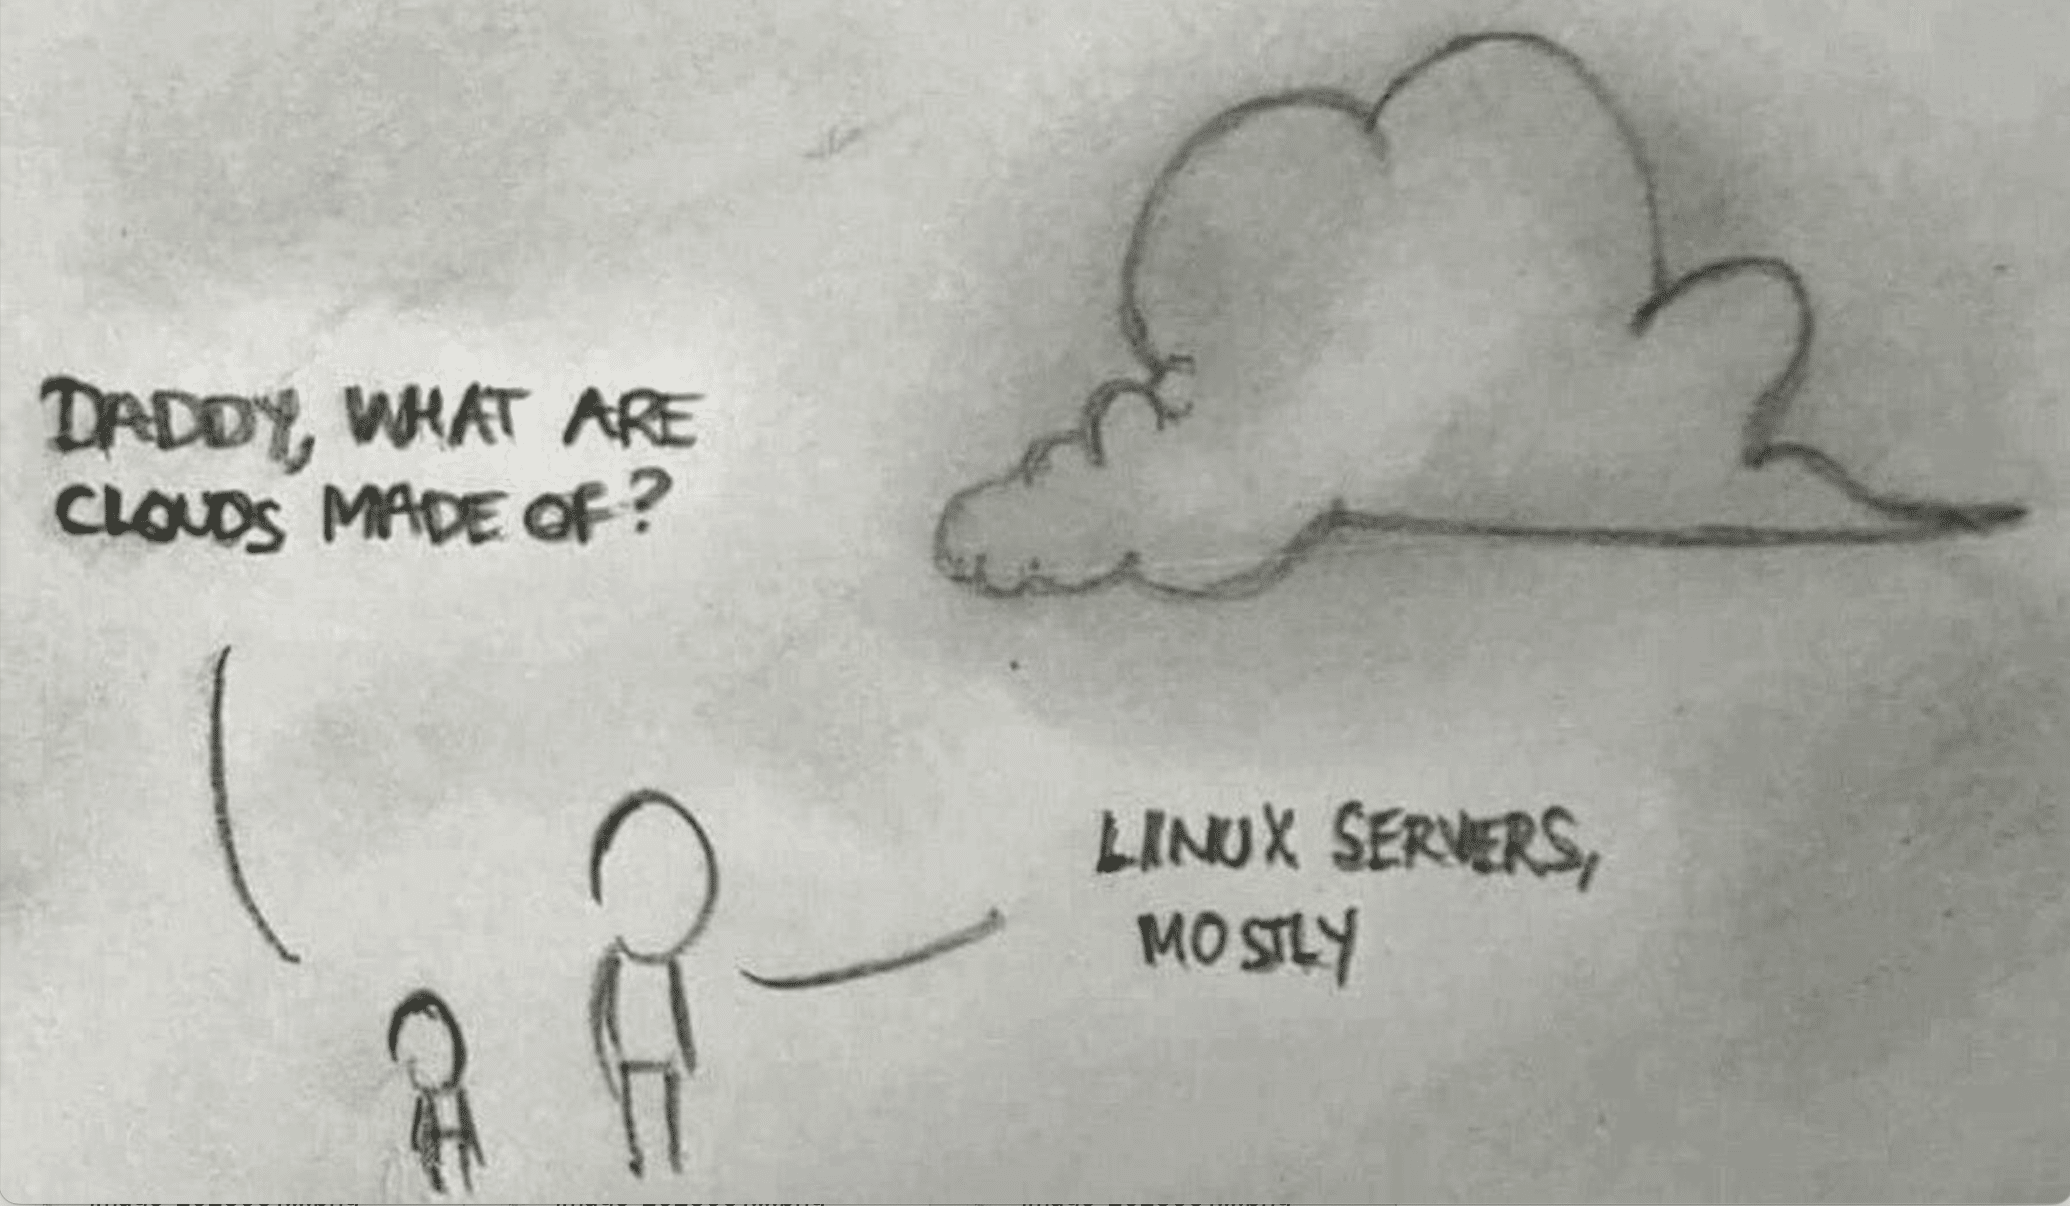 what are clouds made of